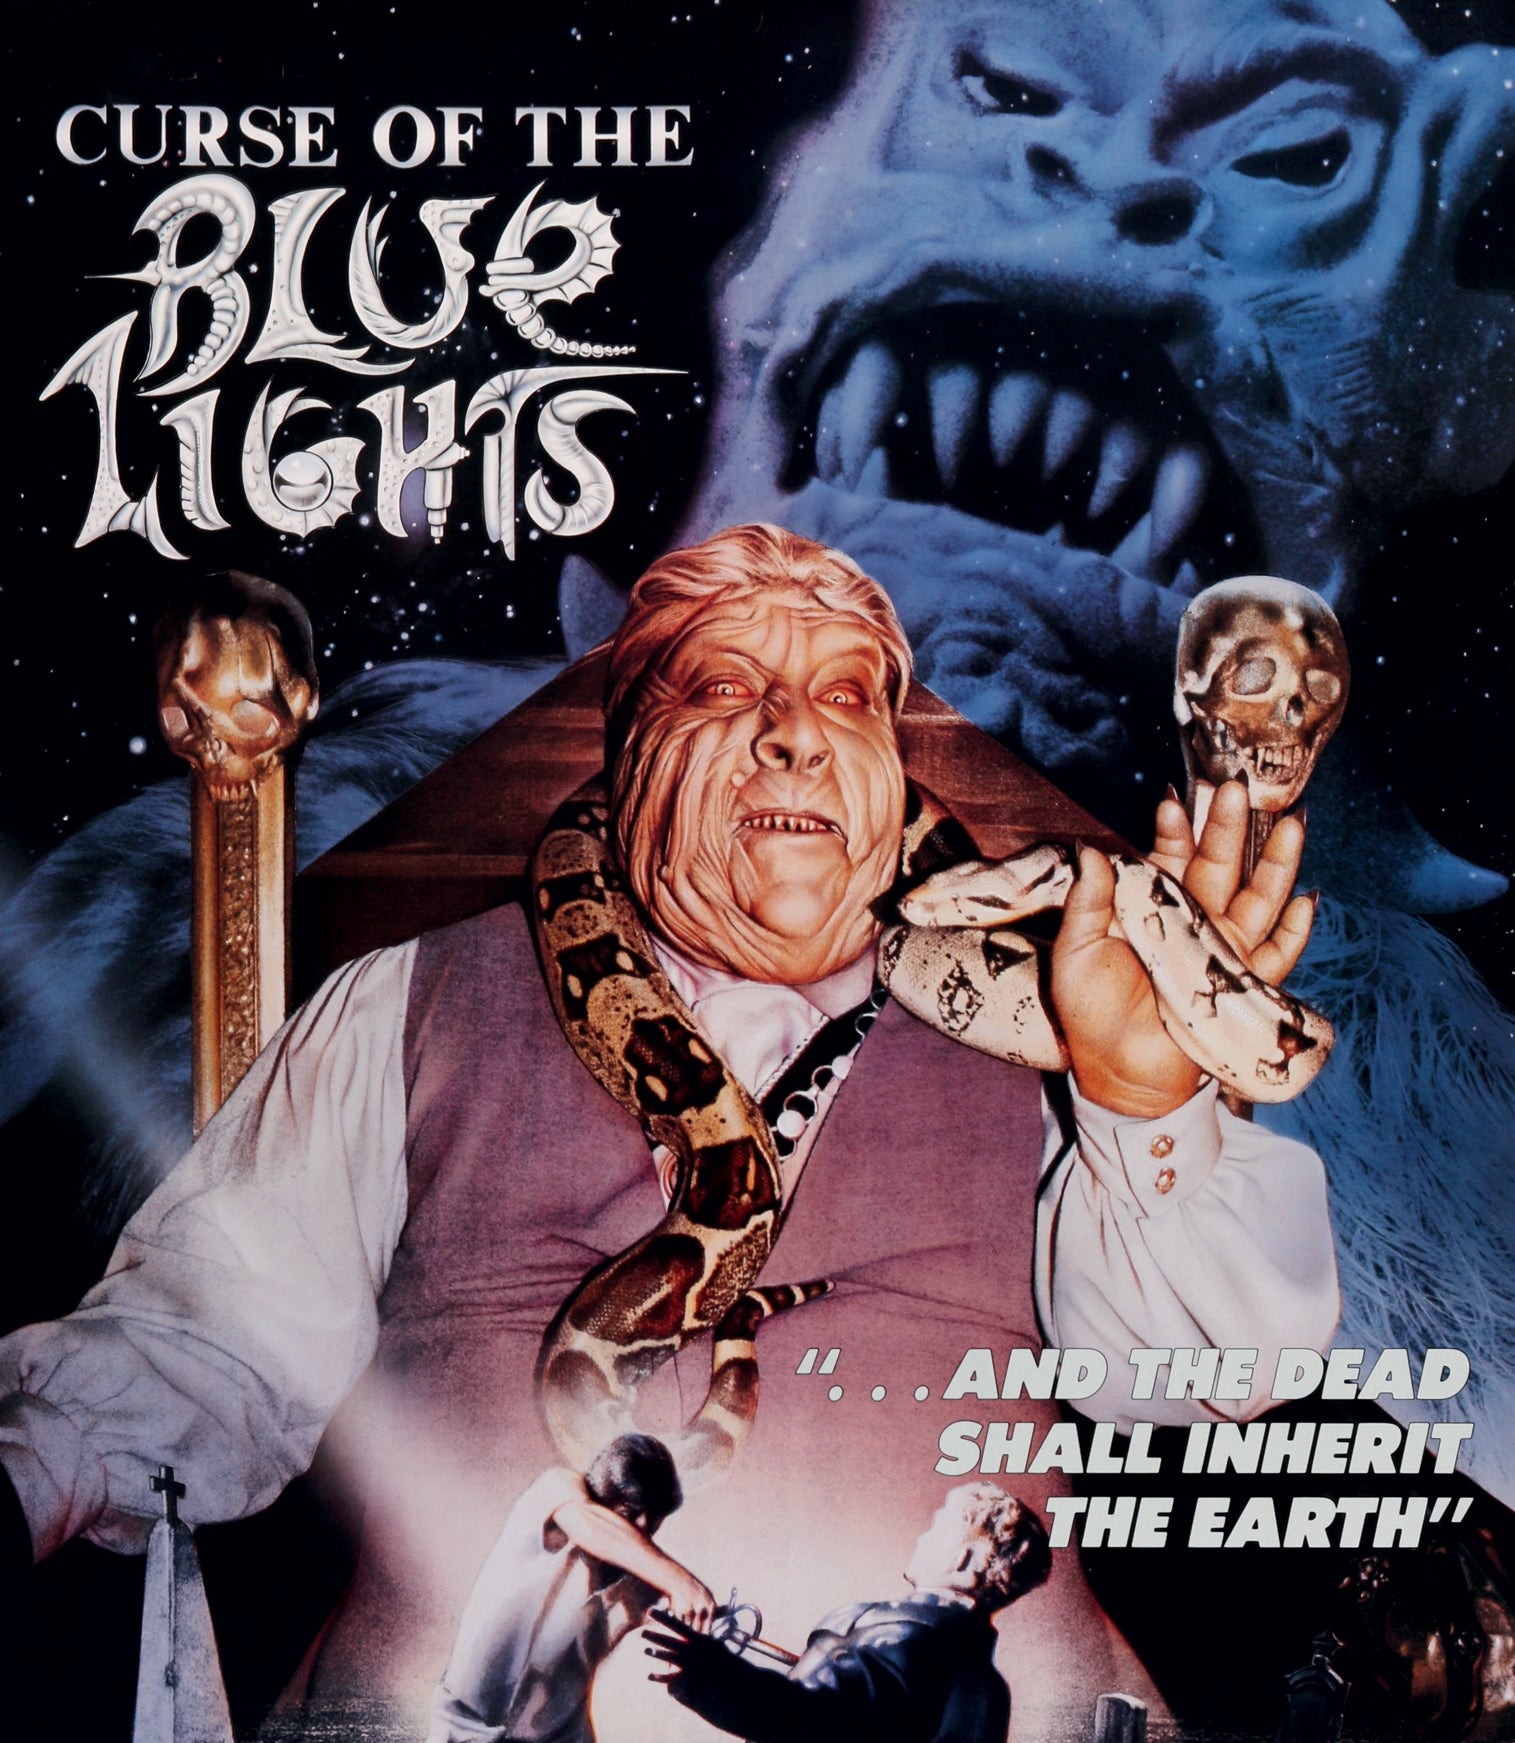 CURSE OF THE BLUE LIGHTS BLU-RAY